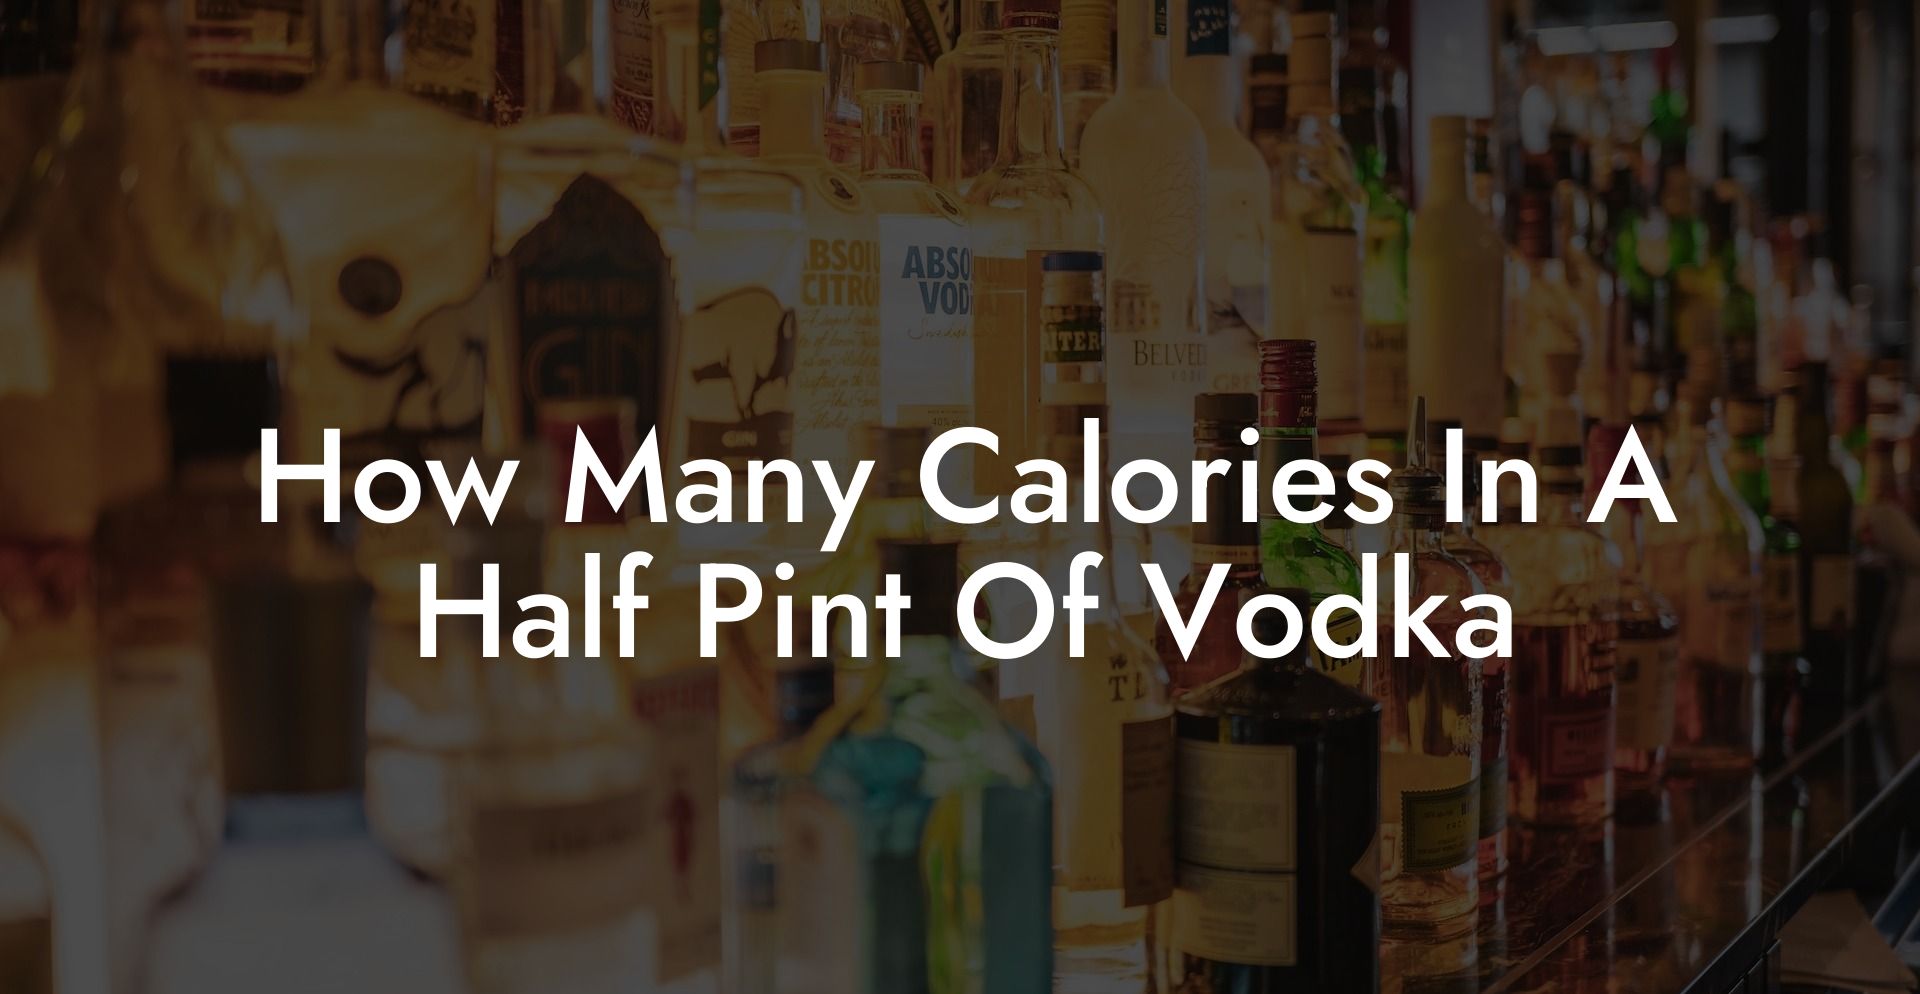 How Many Calories In A Half Pint Of Vodka